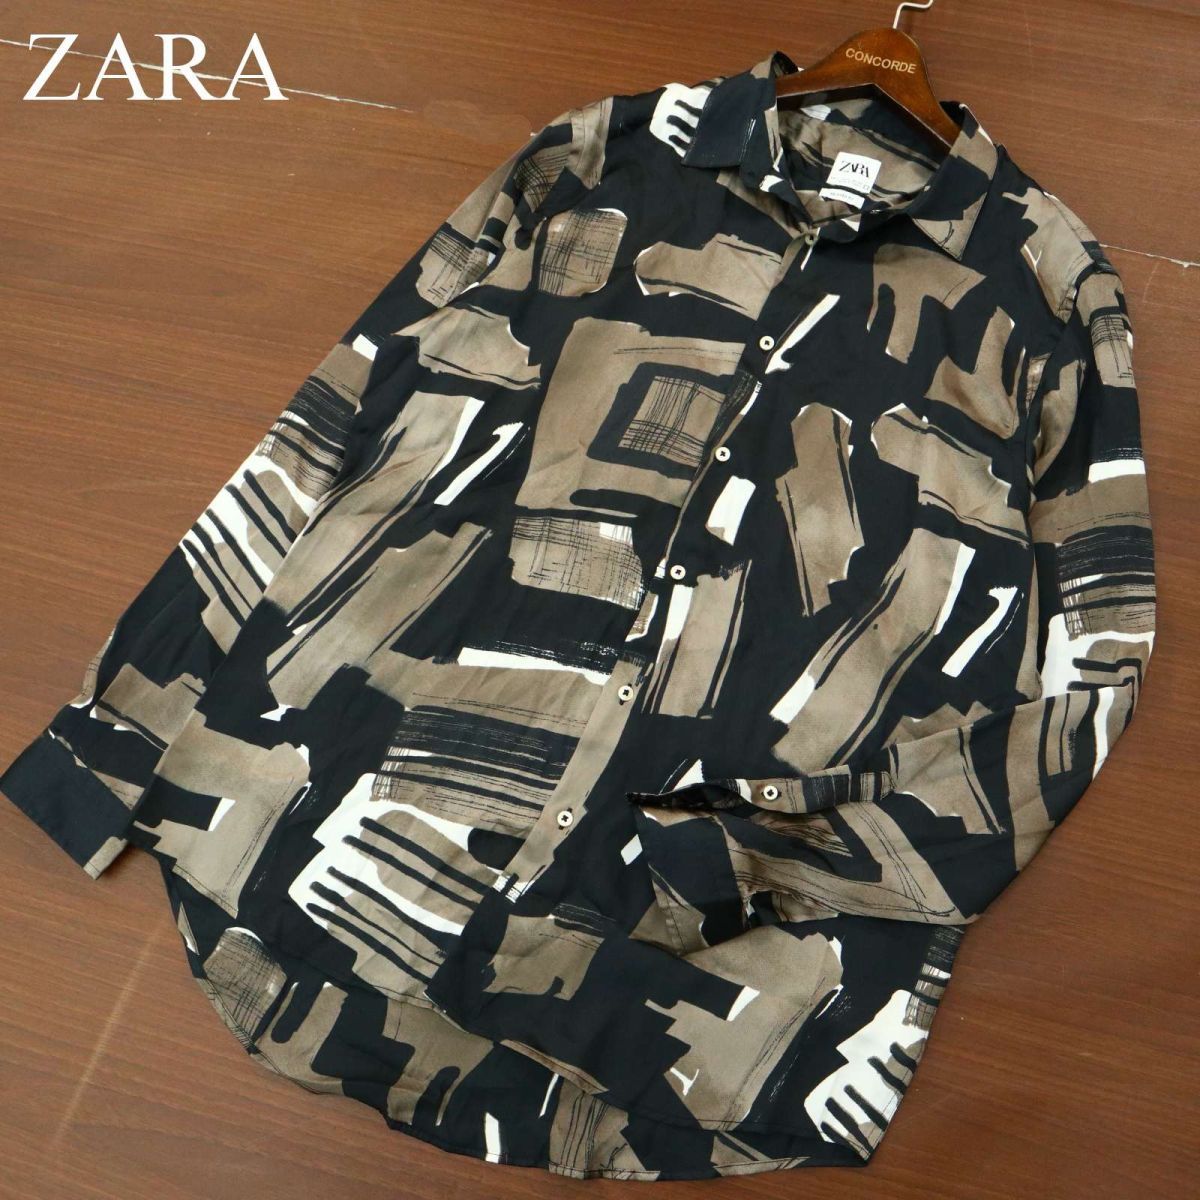 ZARA ザラ マン 現行タグ★ 通年 RELAXED FIT 総柄 長袖 シャツ Sz.L　メンズ　A3T12319_A#C_画像1